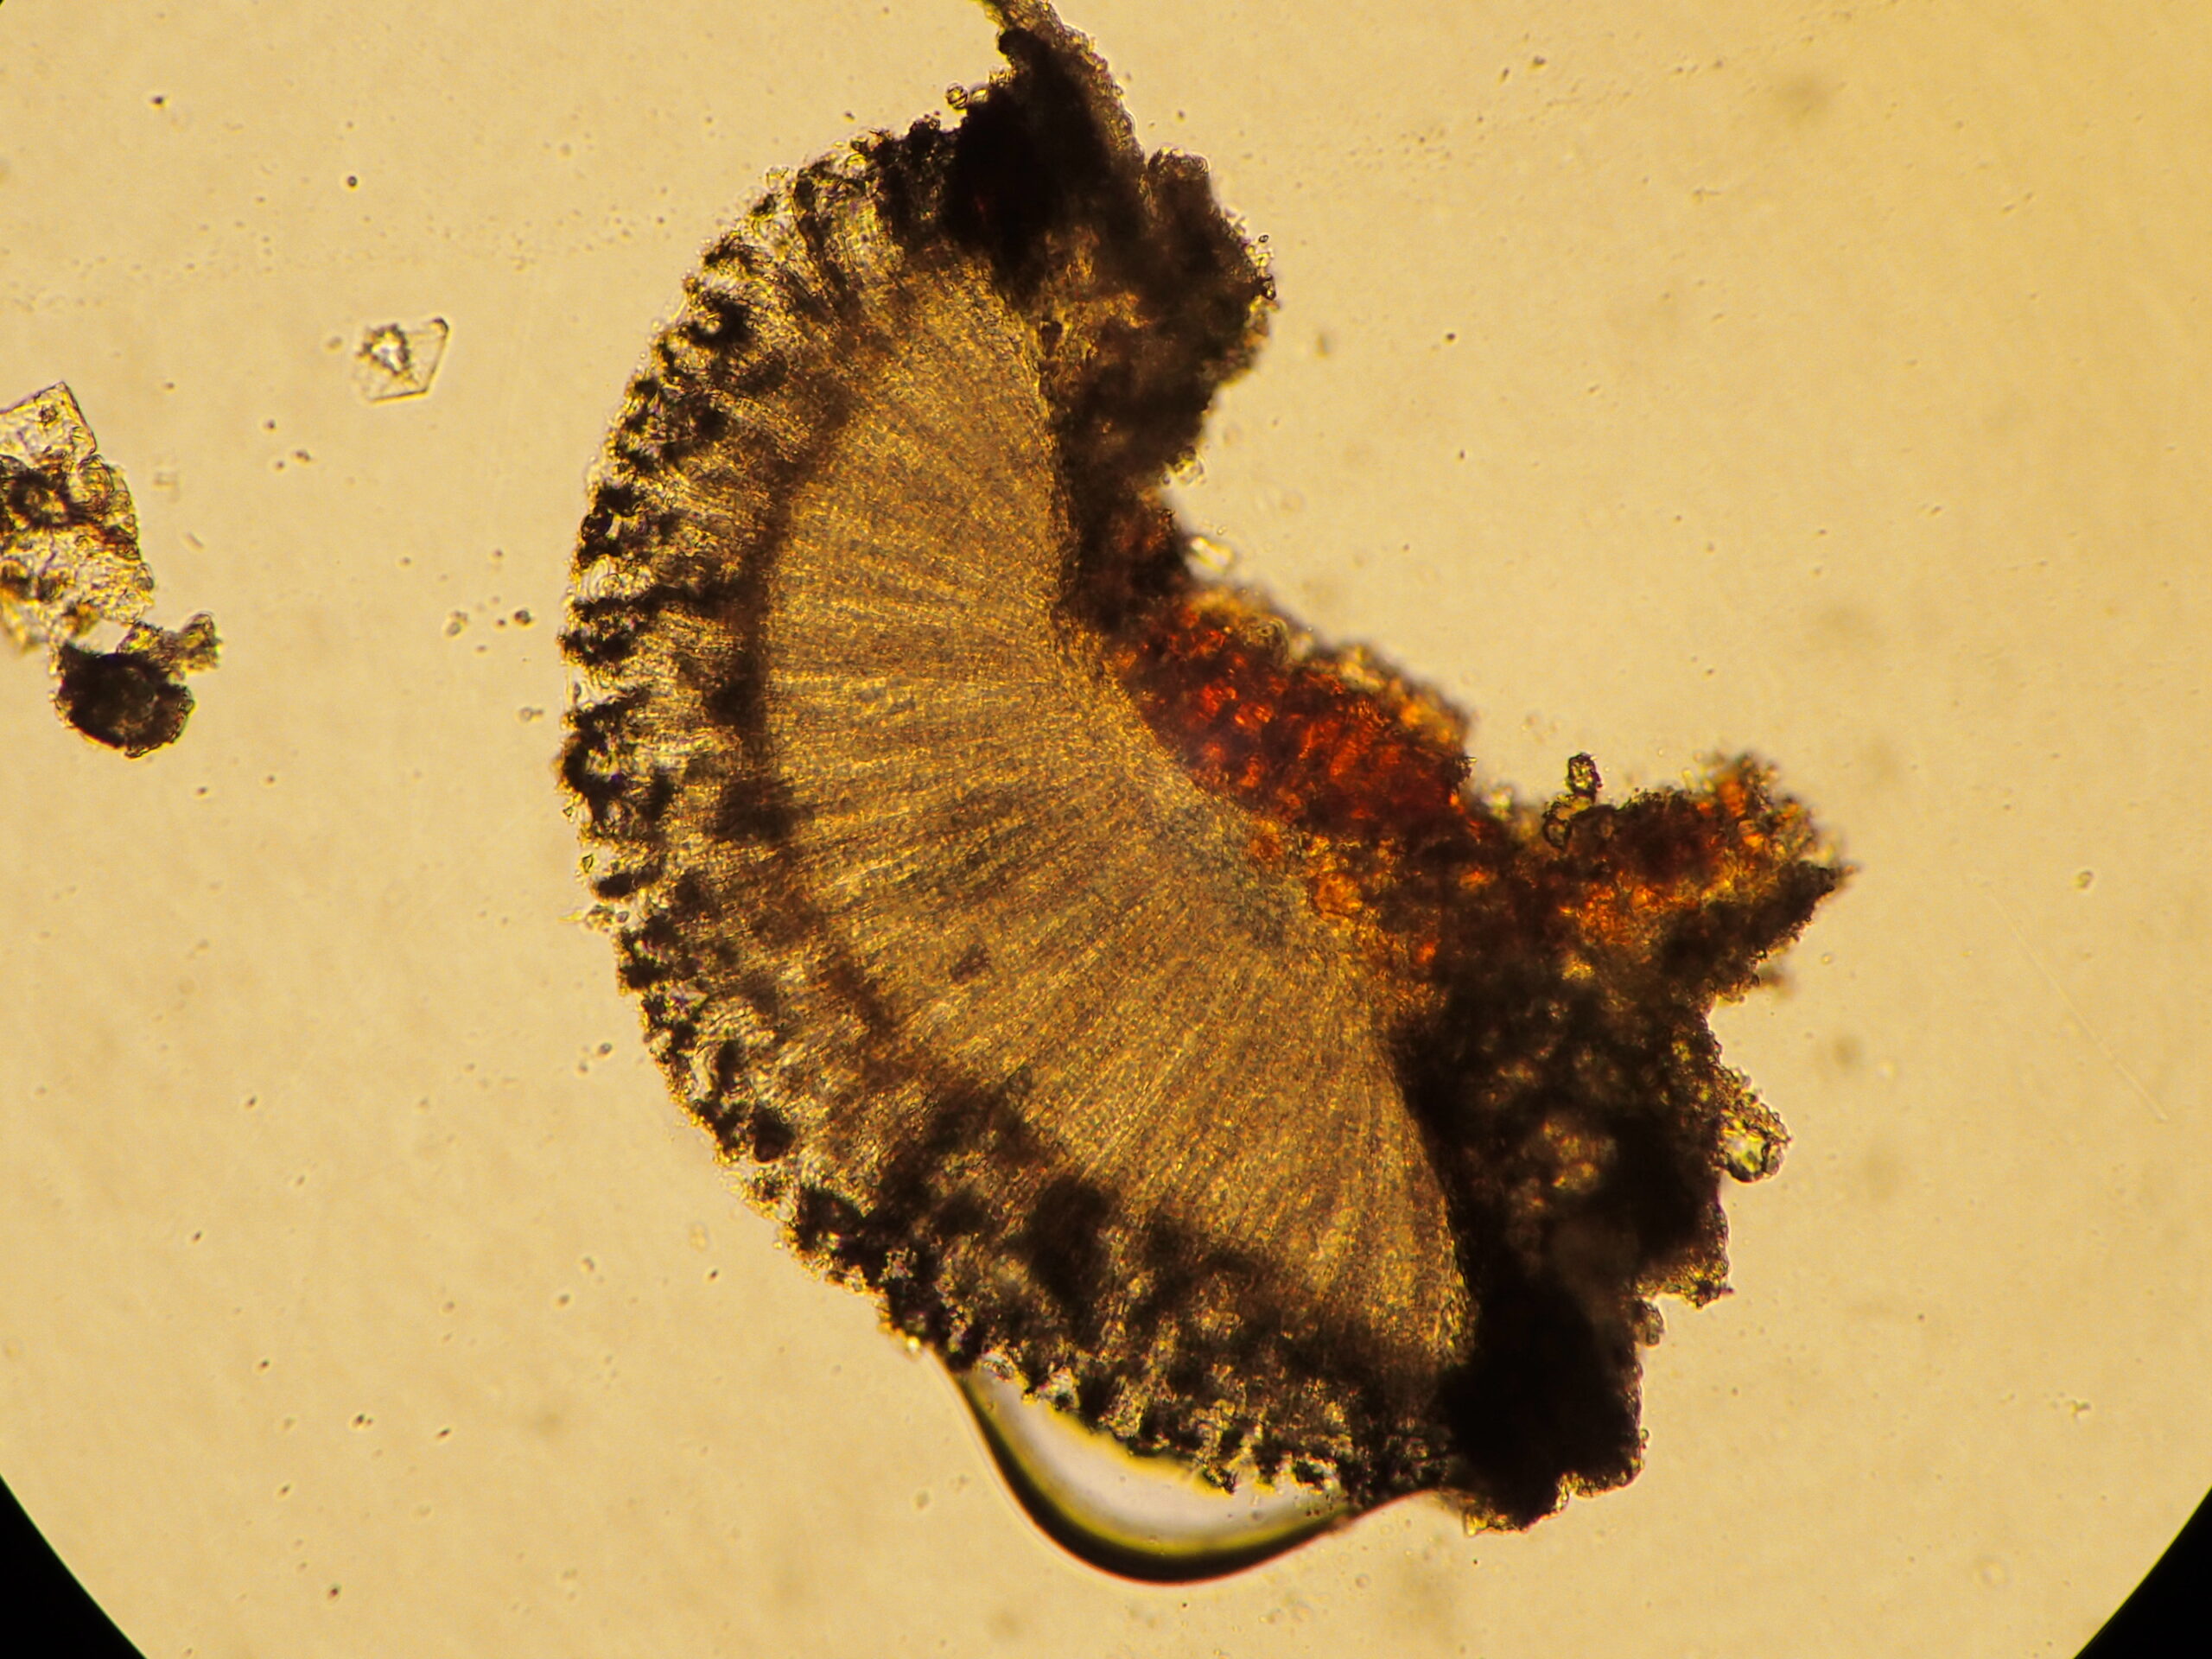 Phaeographis smithii, with incomplete black exciple